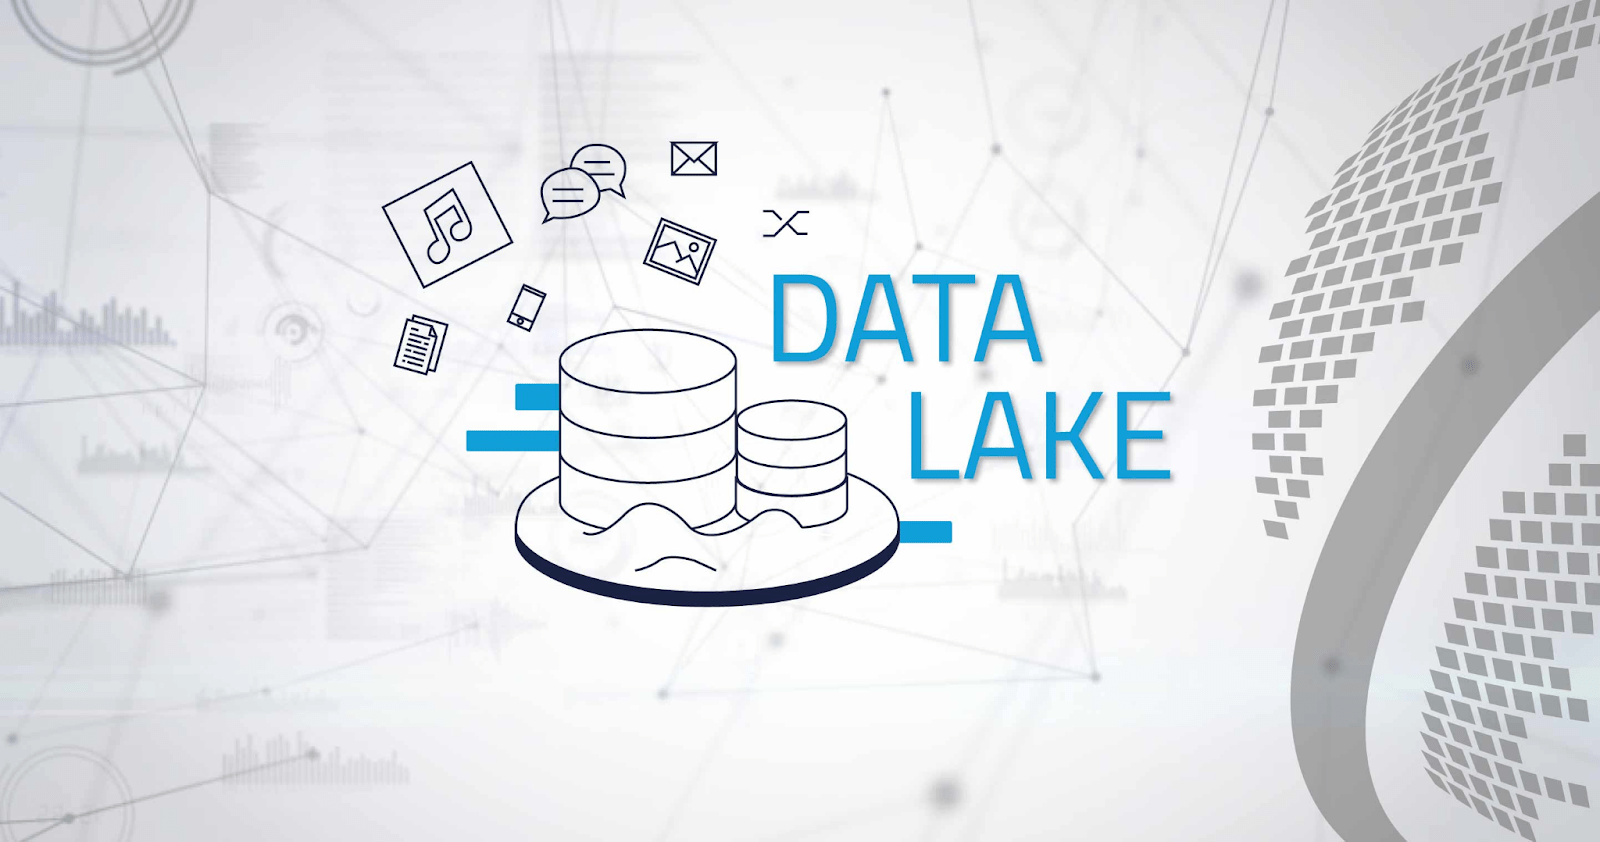 Why you enterprise data lake is wasted without integration